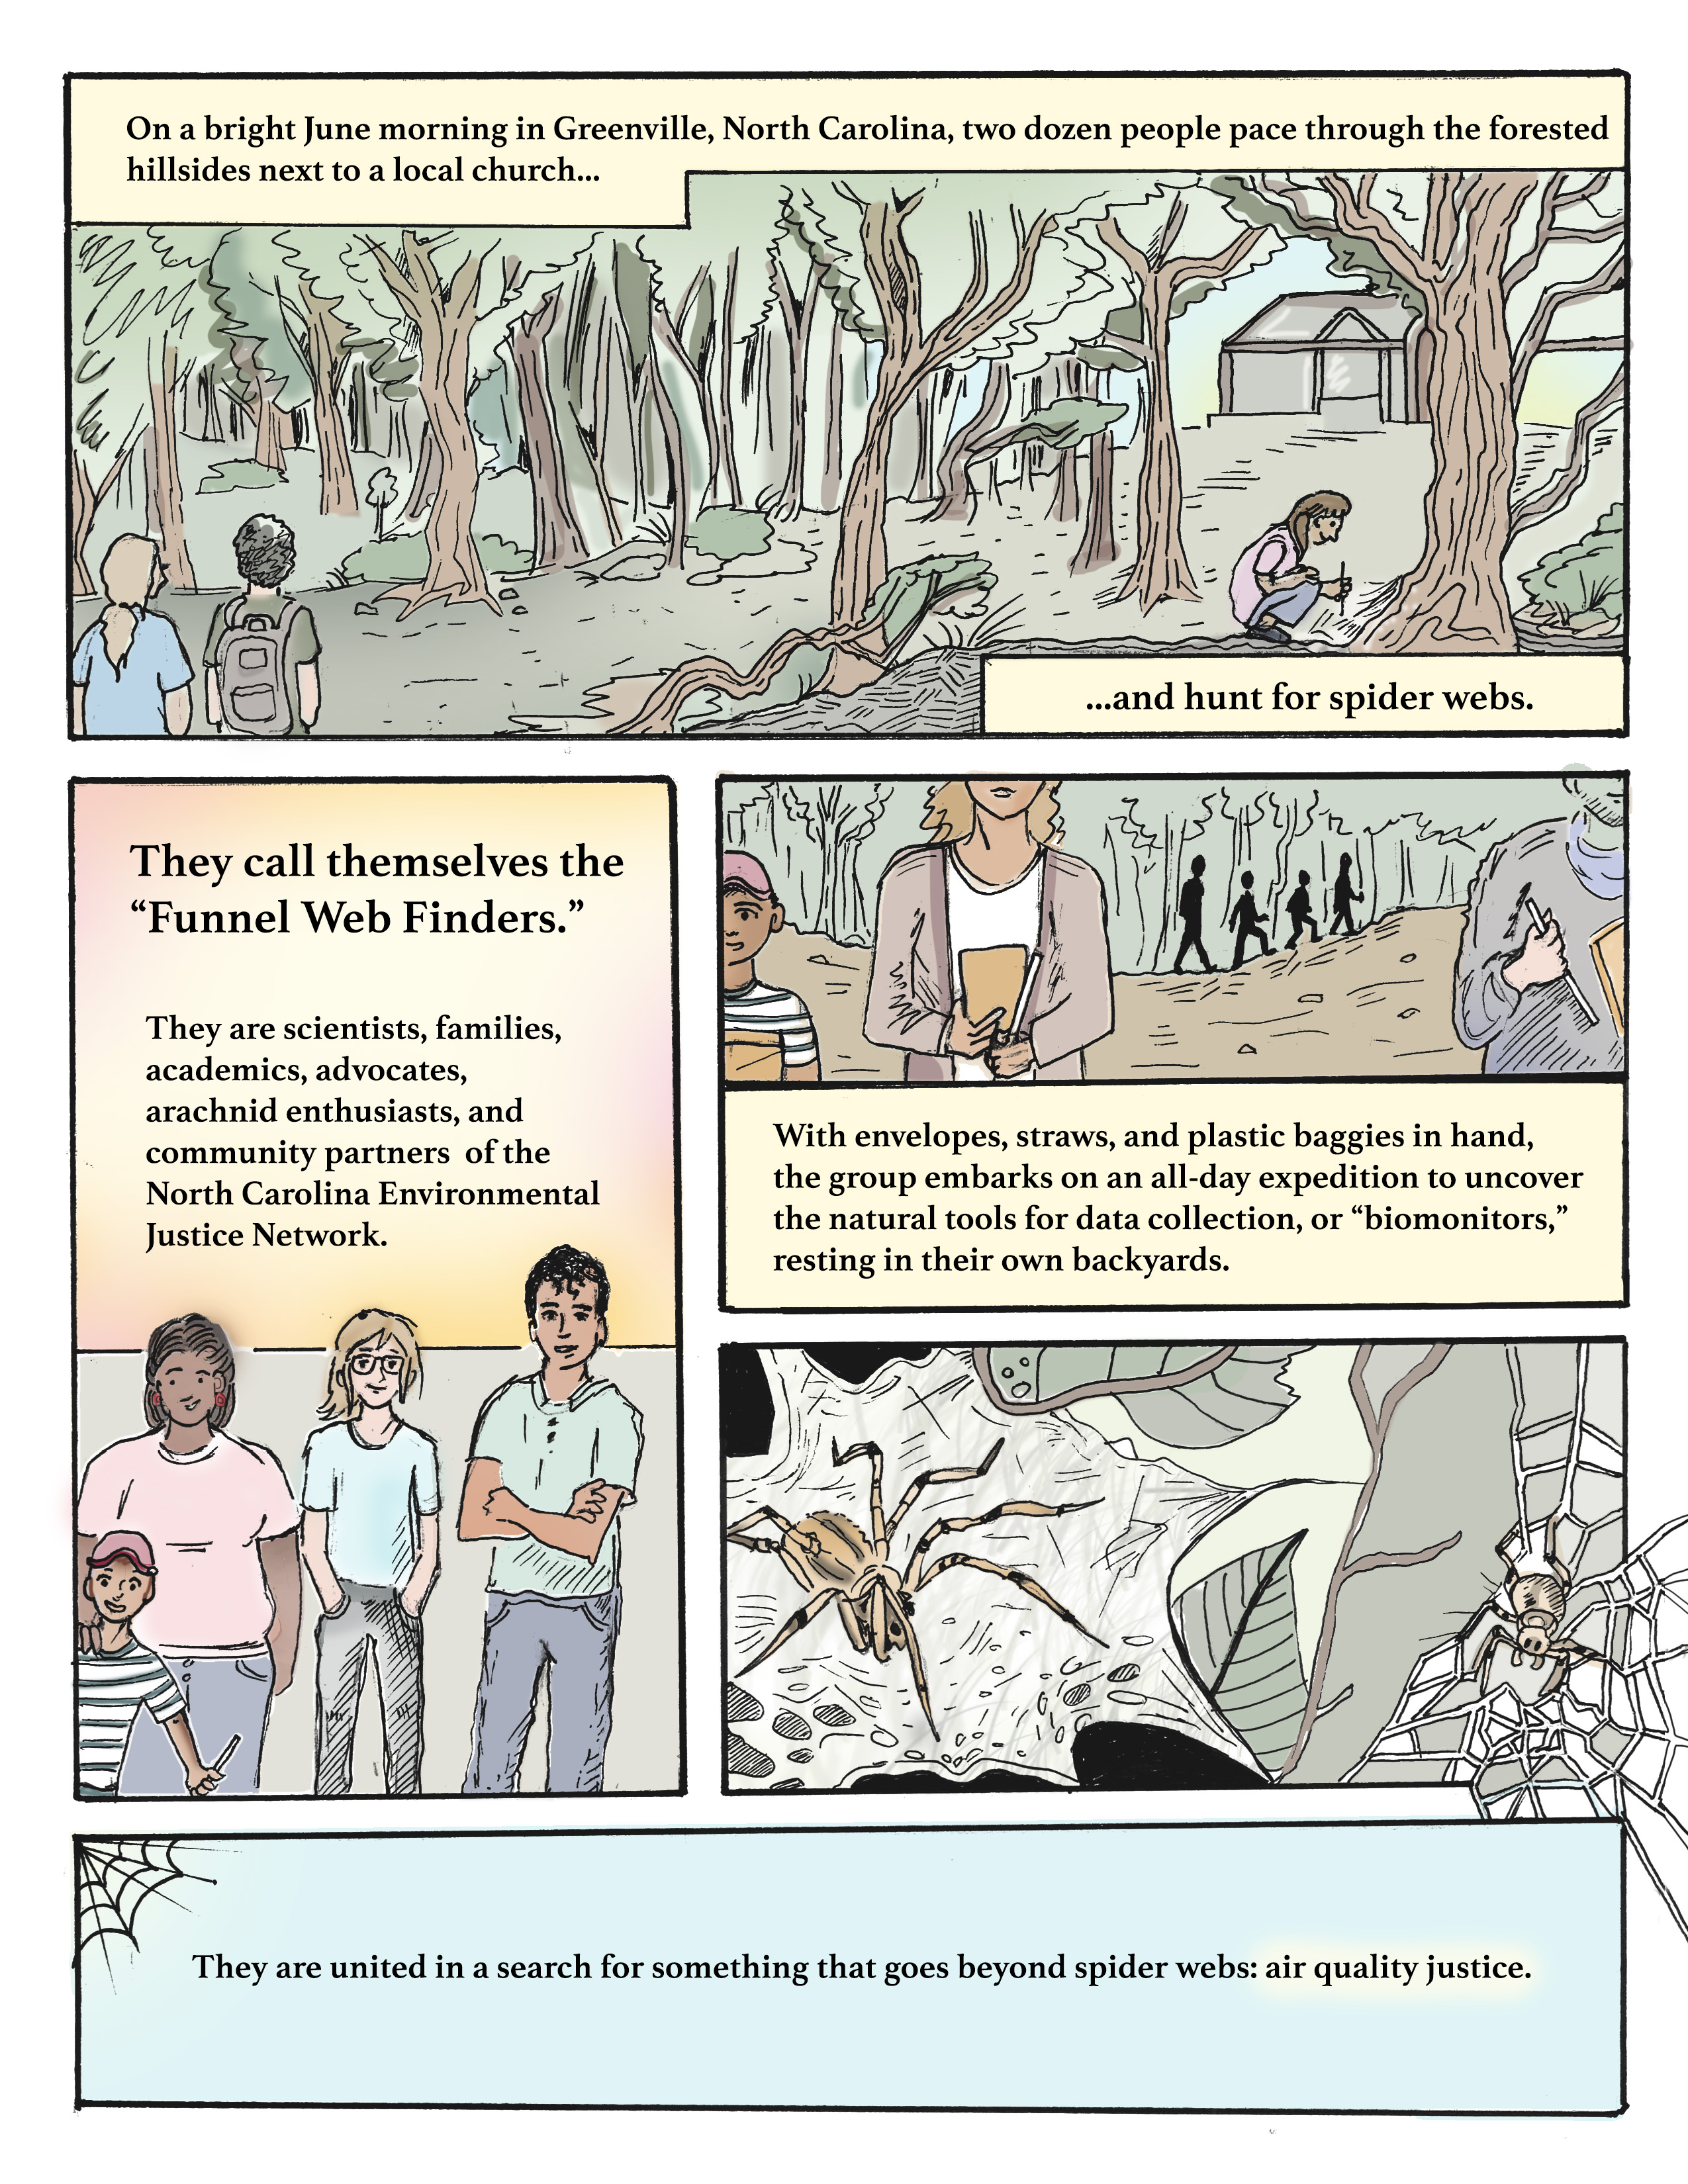 A comic panel describing the "Spidey Sens-r" project in which volunteers can collect spider webs to test for air pollutants. 